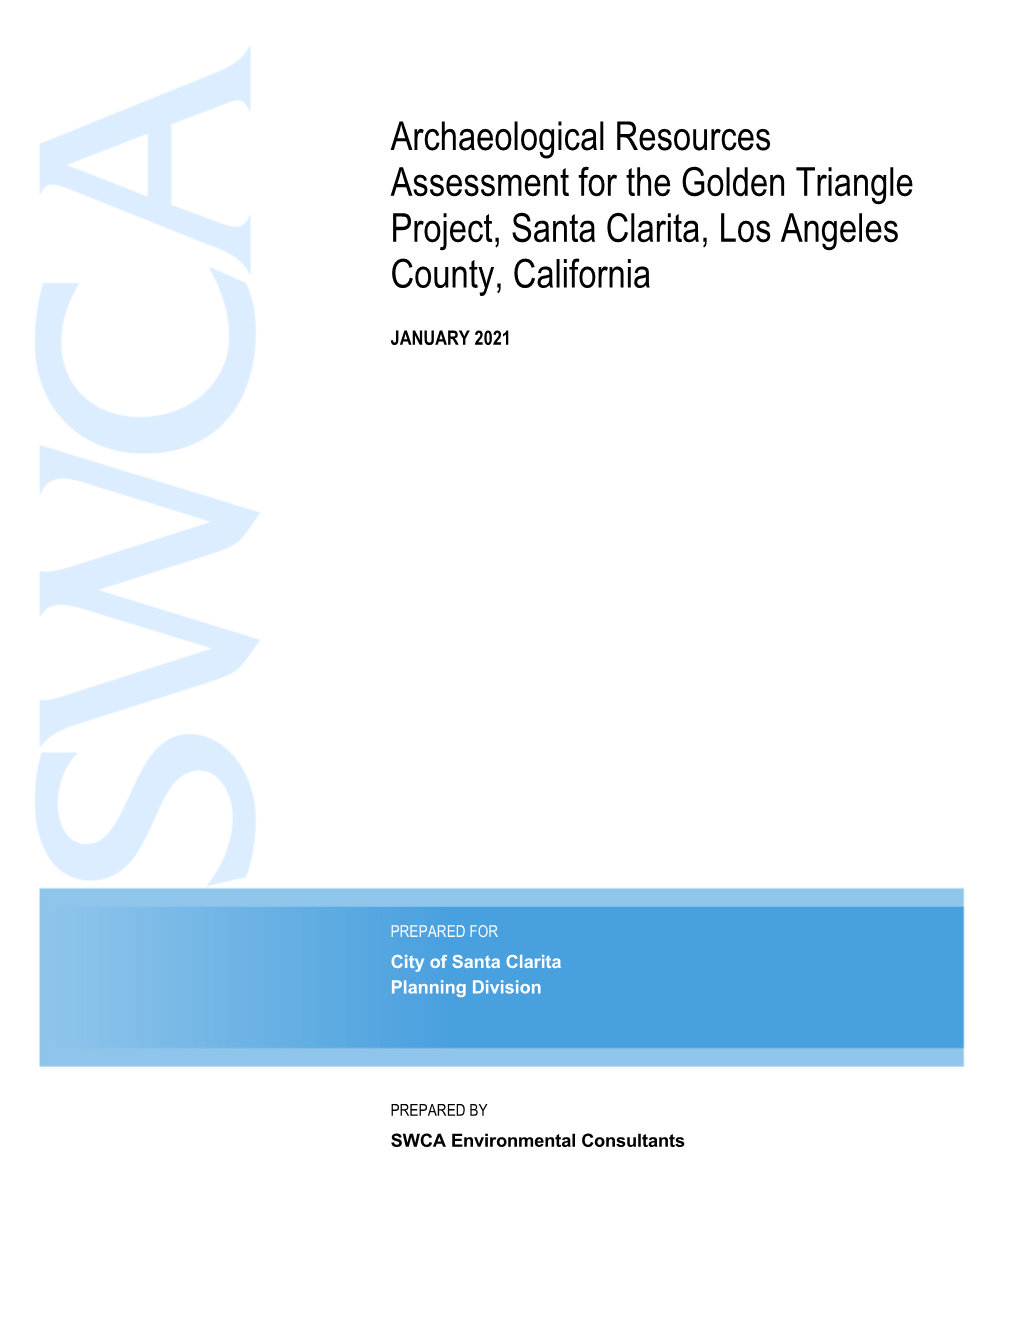 Archaeological Resources Assessment for the Golden Triangle Project, Santa Clarita, Los Angeles County, California